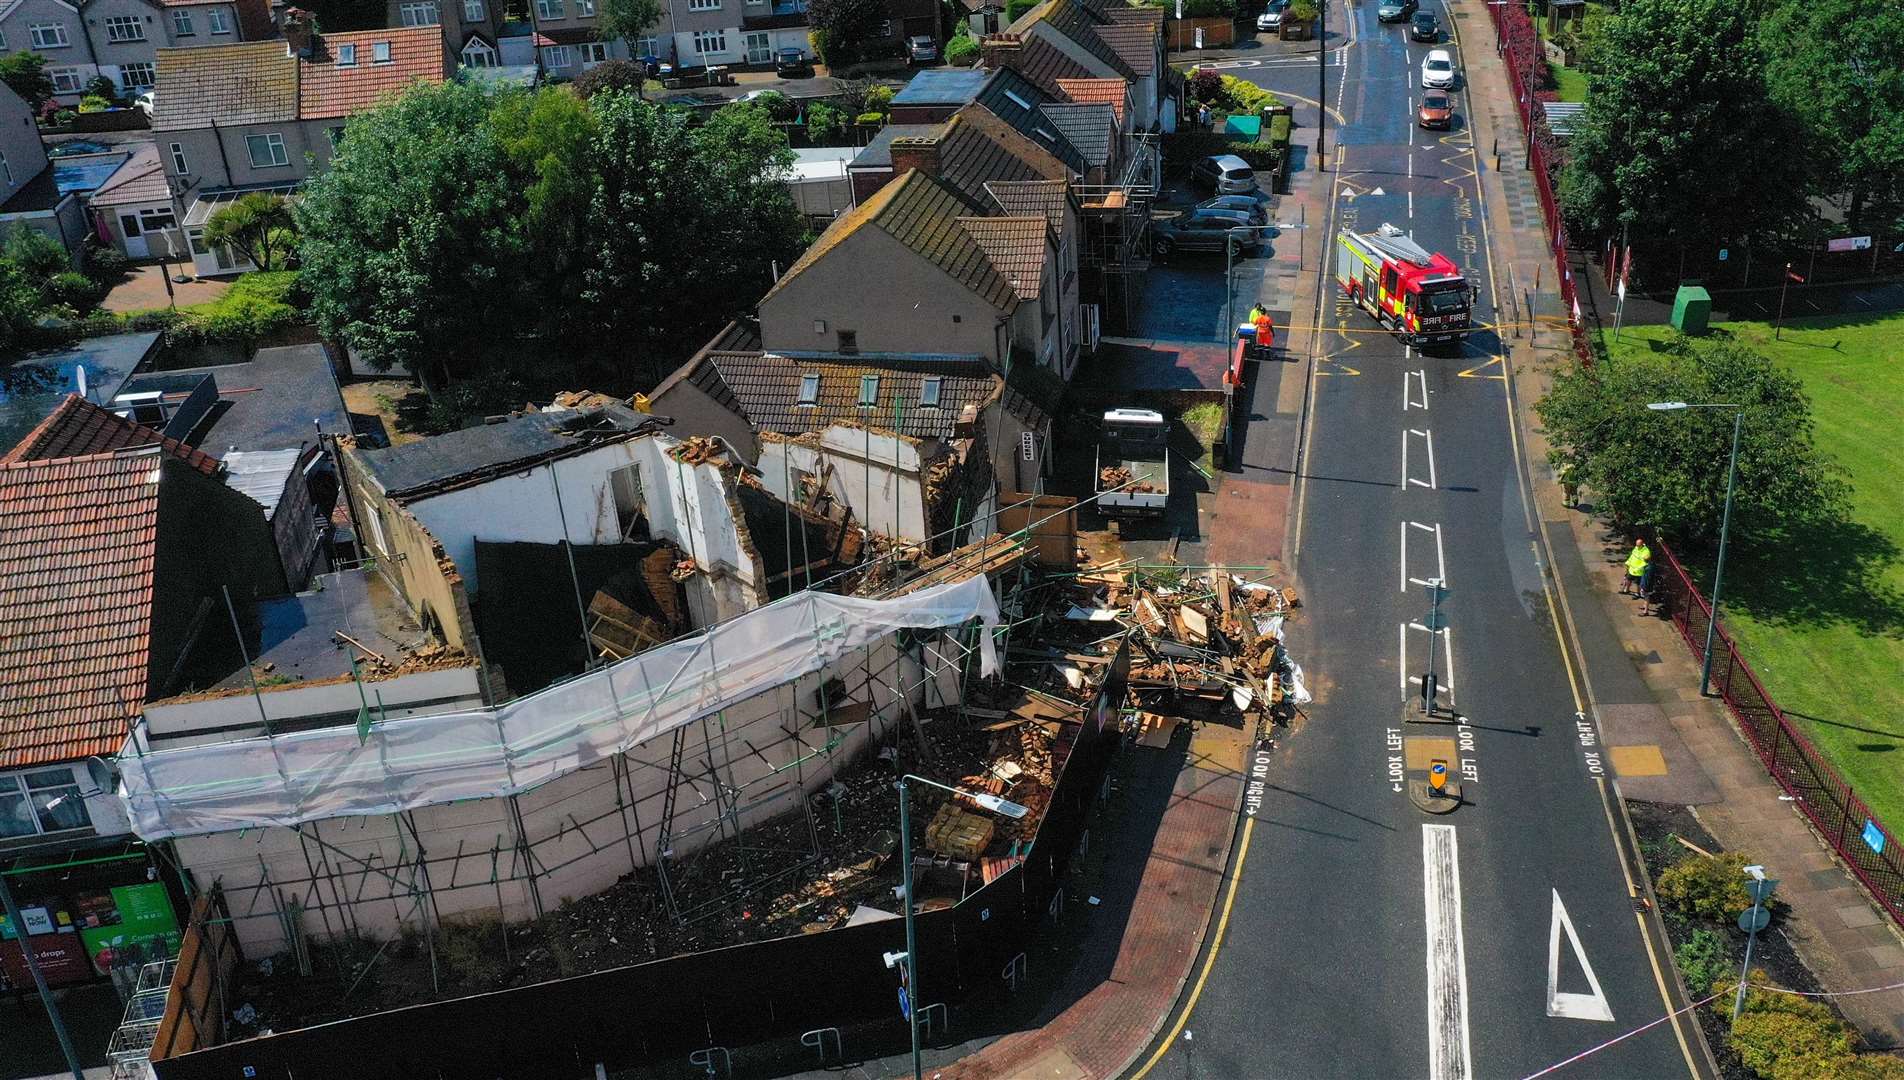 An aerial shot shows the extent of the damage. Image from UKNIP